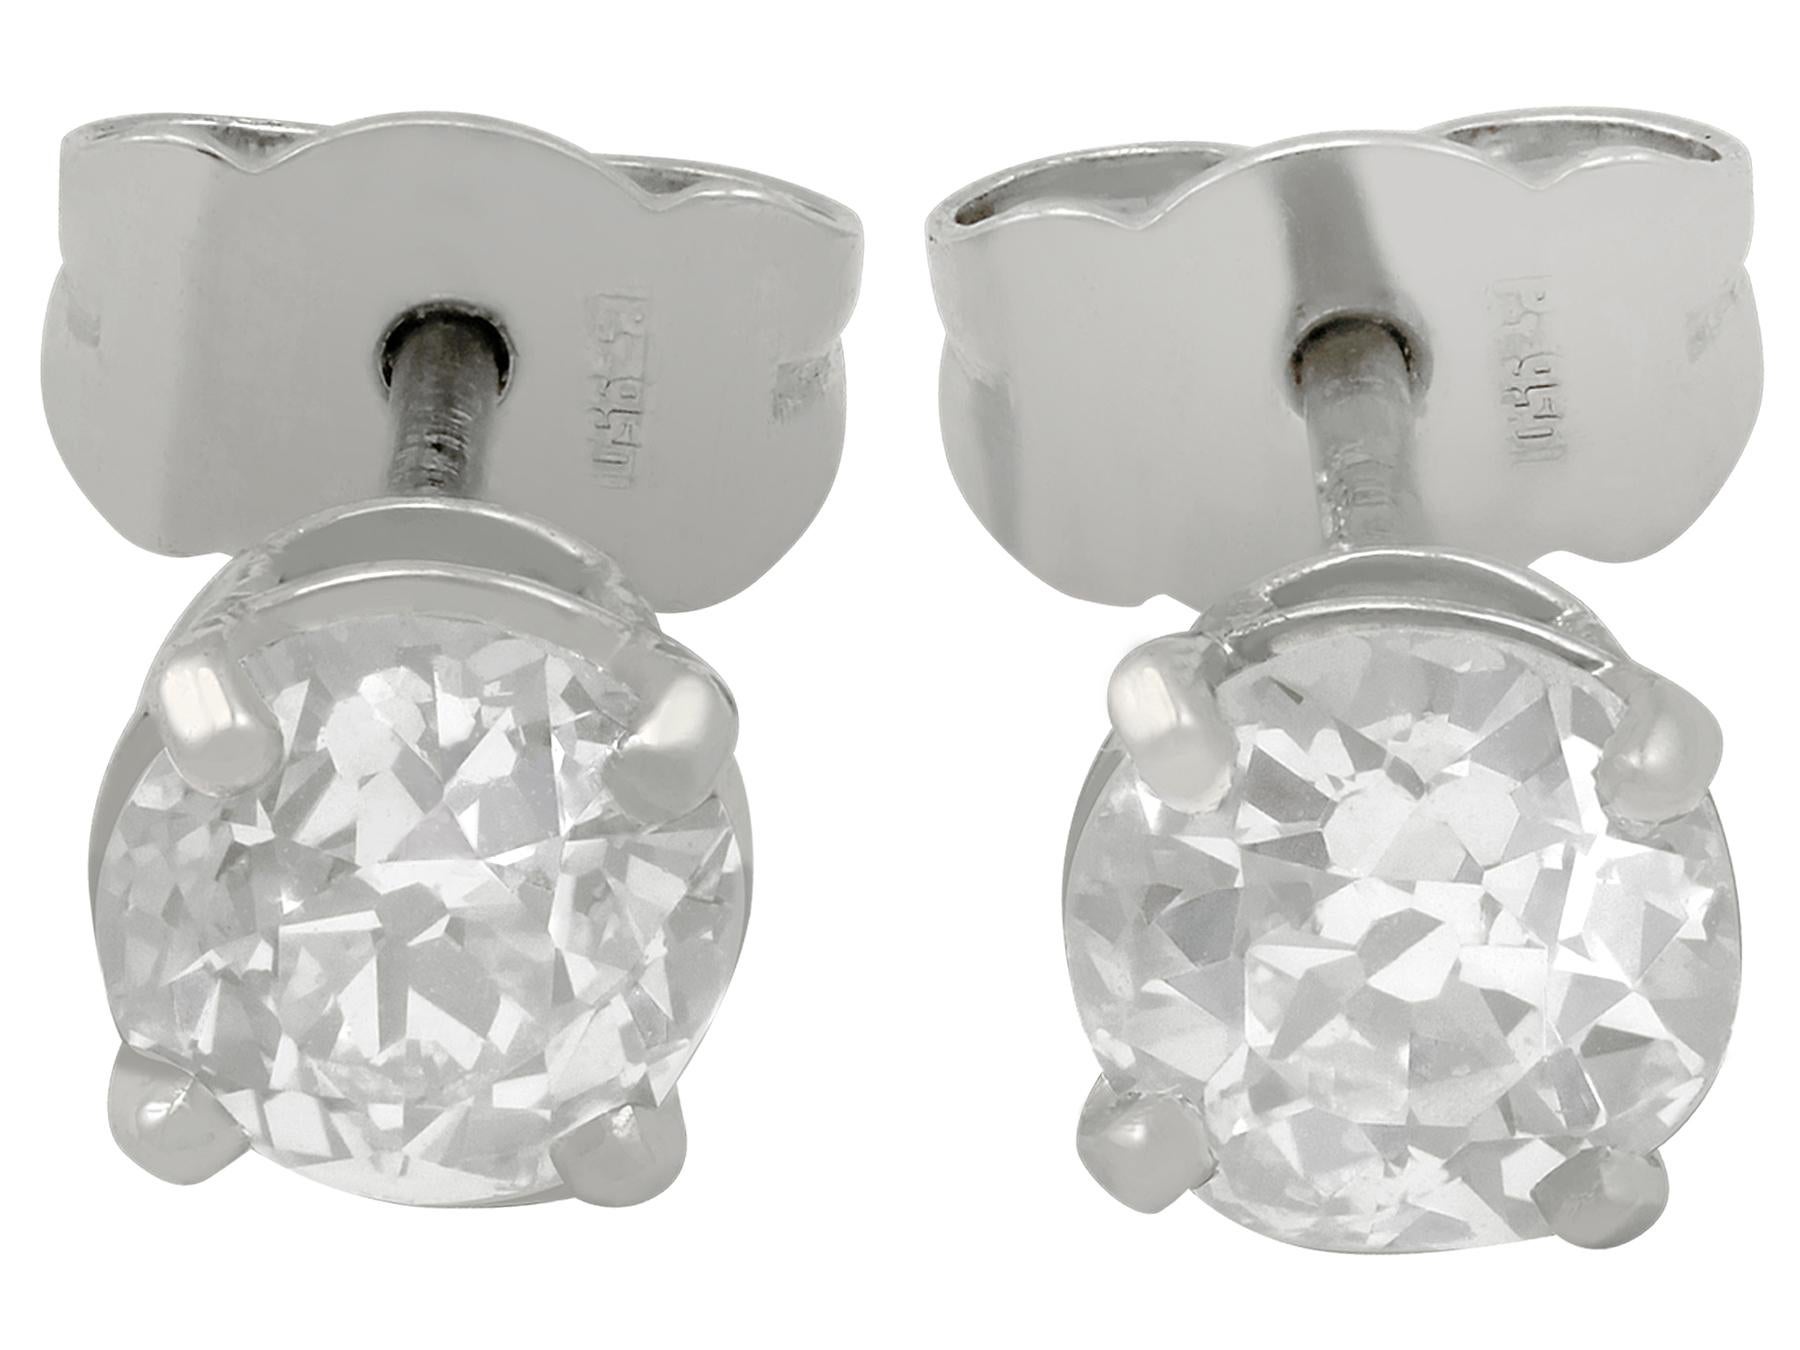 An impressive pair of antique 1900's 1.28 carat diamond and contemporary platinum stud earrings; part of our diverse diamond jewelry and estate jewelry collections.

These fine and impressive diamond stud earrings have been crafted in platinum.

The